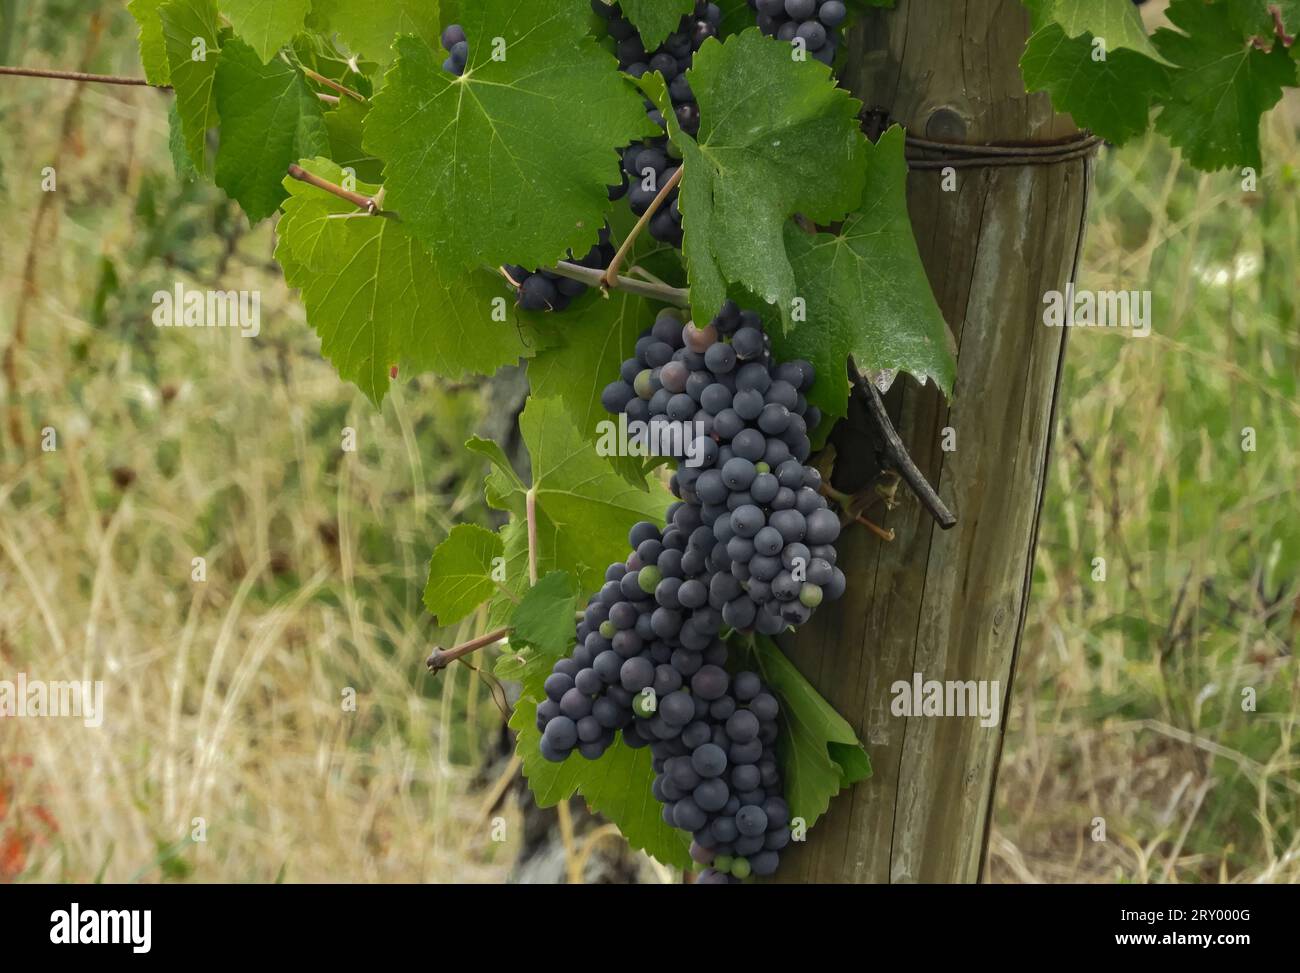 Ripe bunches of Pinot Noir grapes on a vine Stock Photo